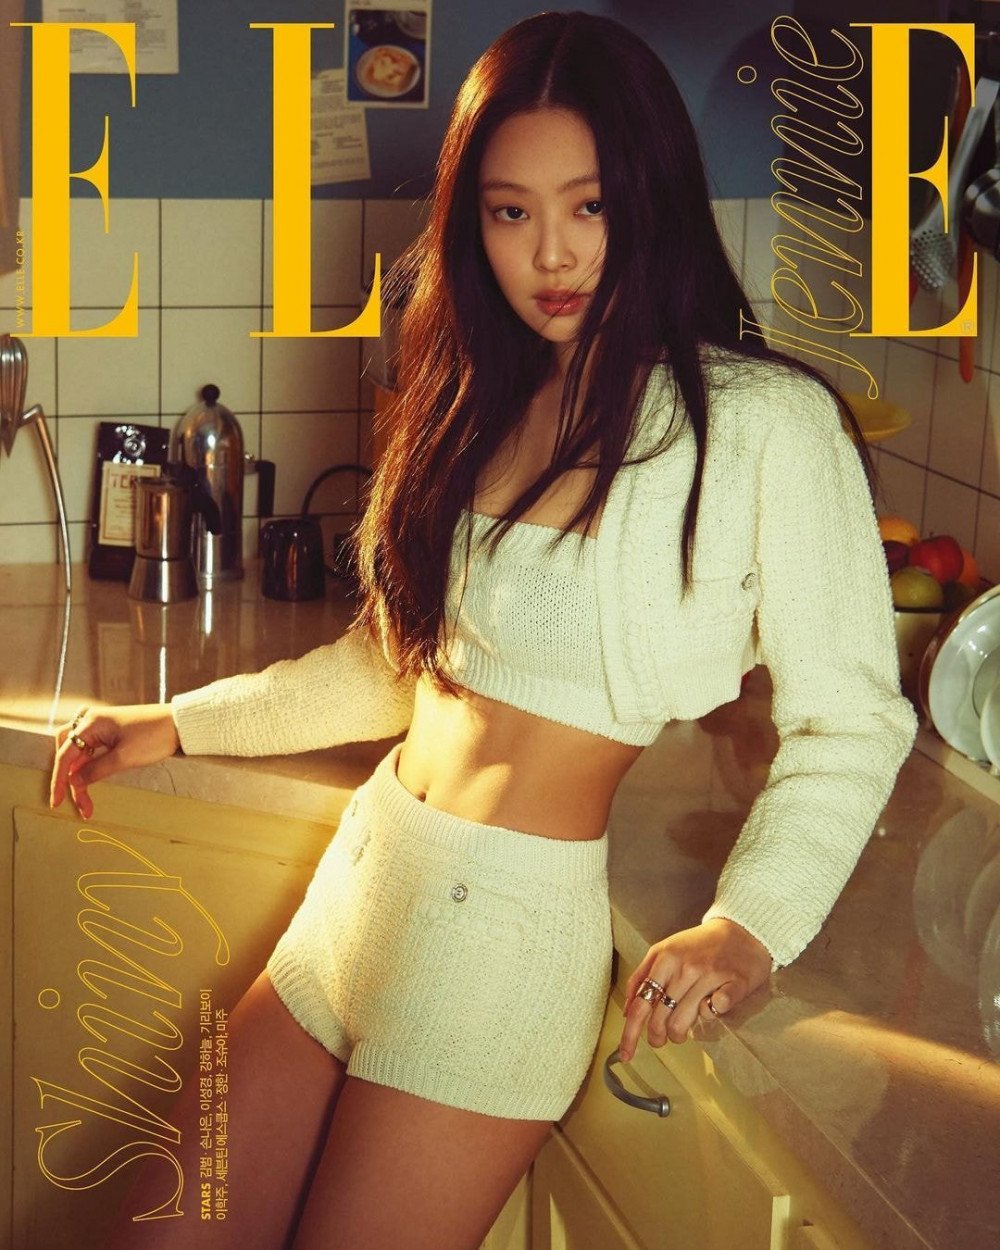 BLACKPINK's Jennie is totally crush-worthy on the cover of 'Elle